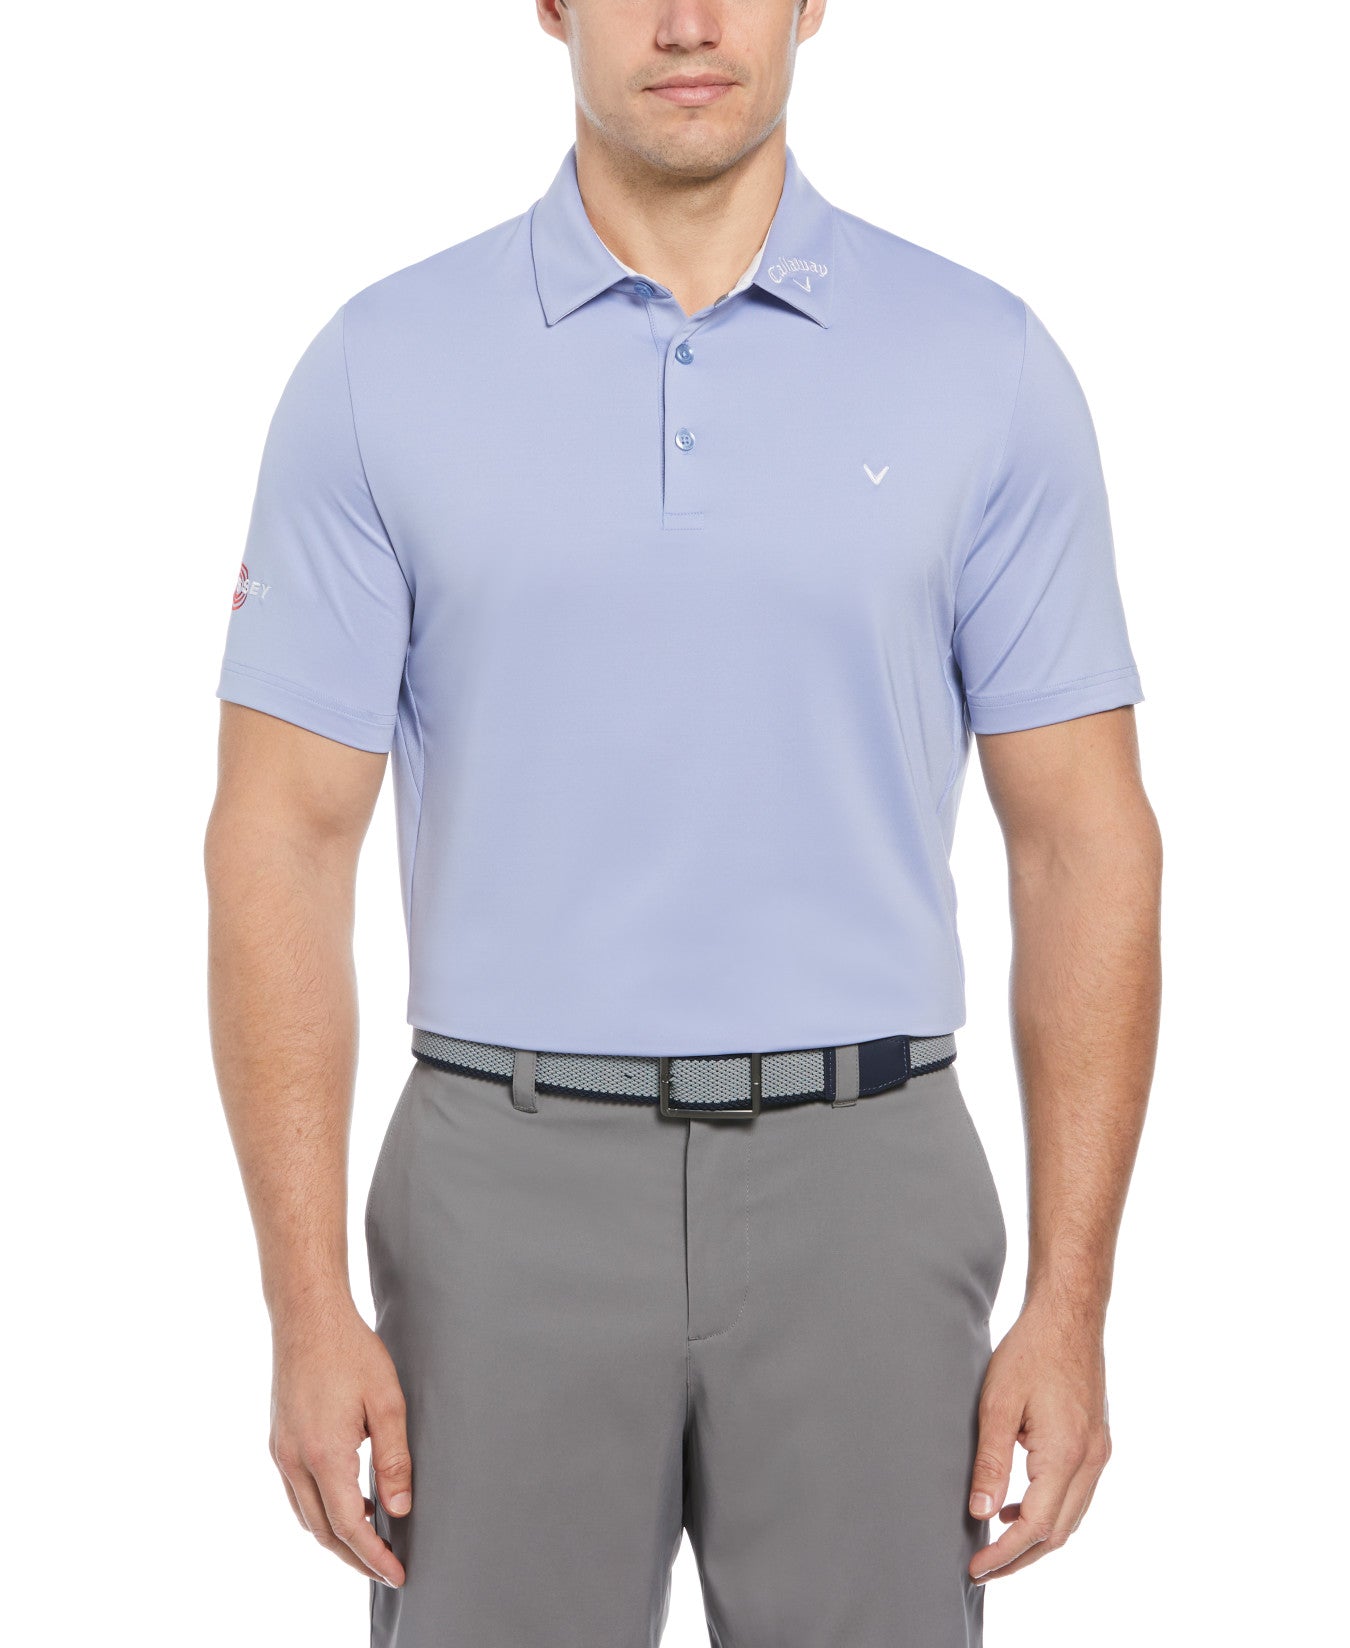 View Short Sleeve Odyssey Block Polo Shirt In Chambray information